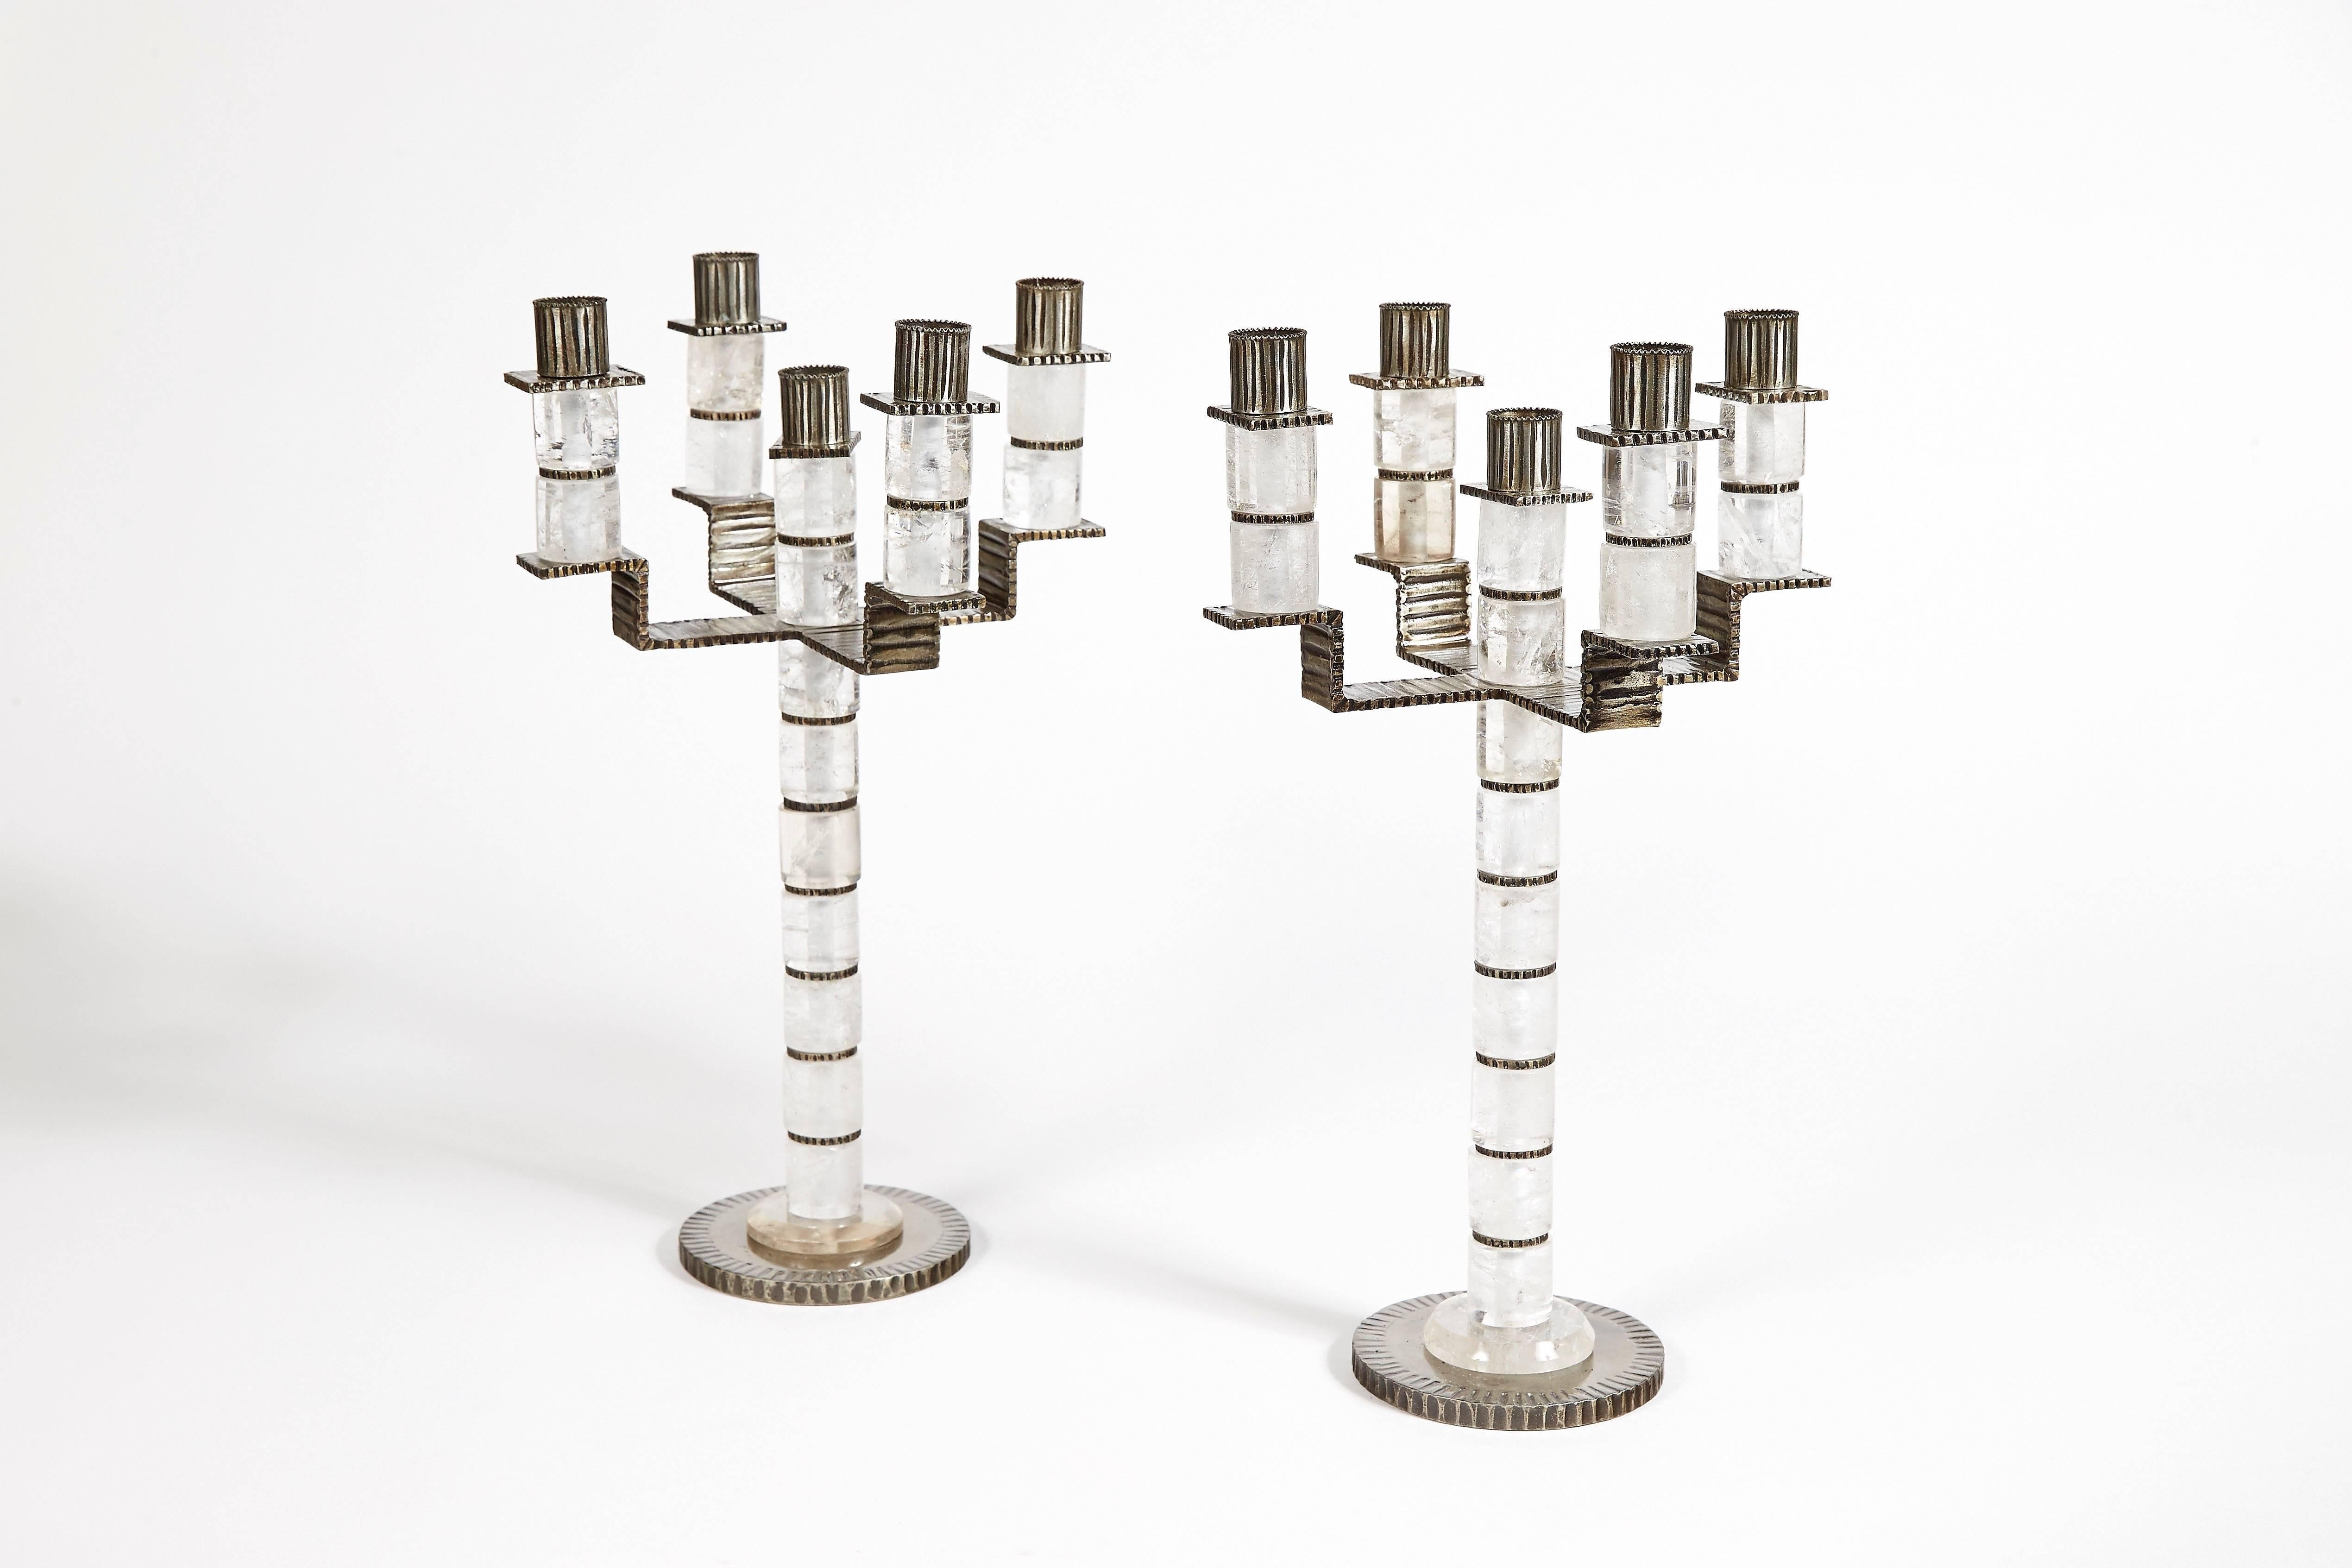 A Pair of Five Branches Candelabra, 2003
Eighteen elements in rock crystal, spacers and base in hammered wrought iron